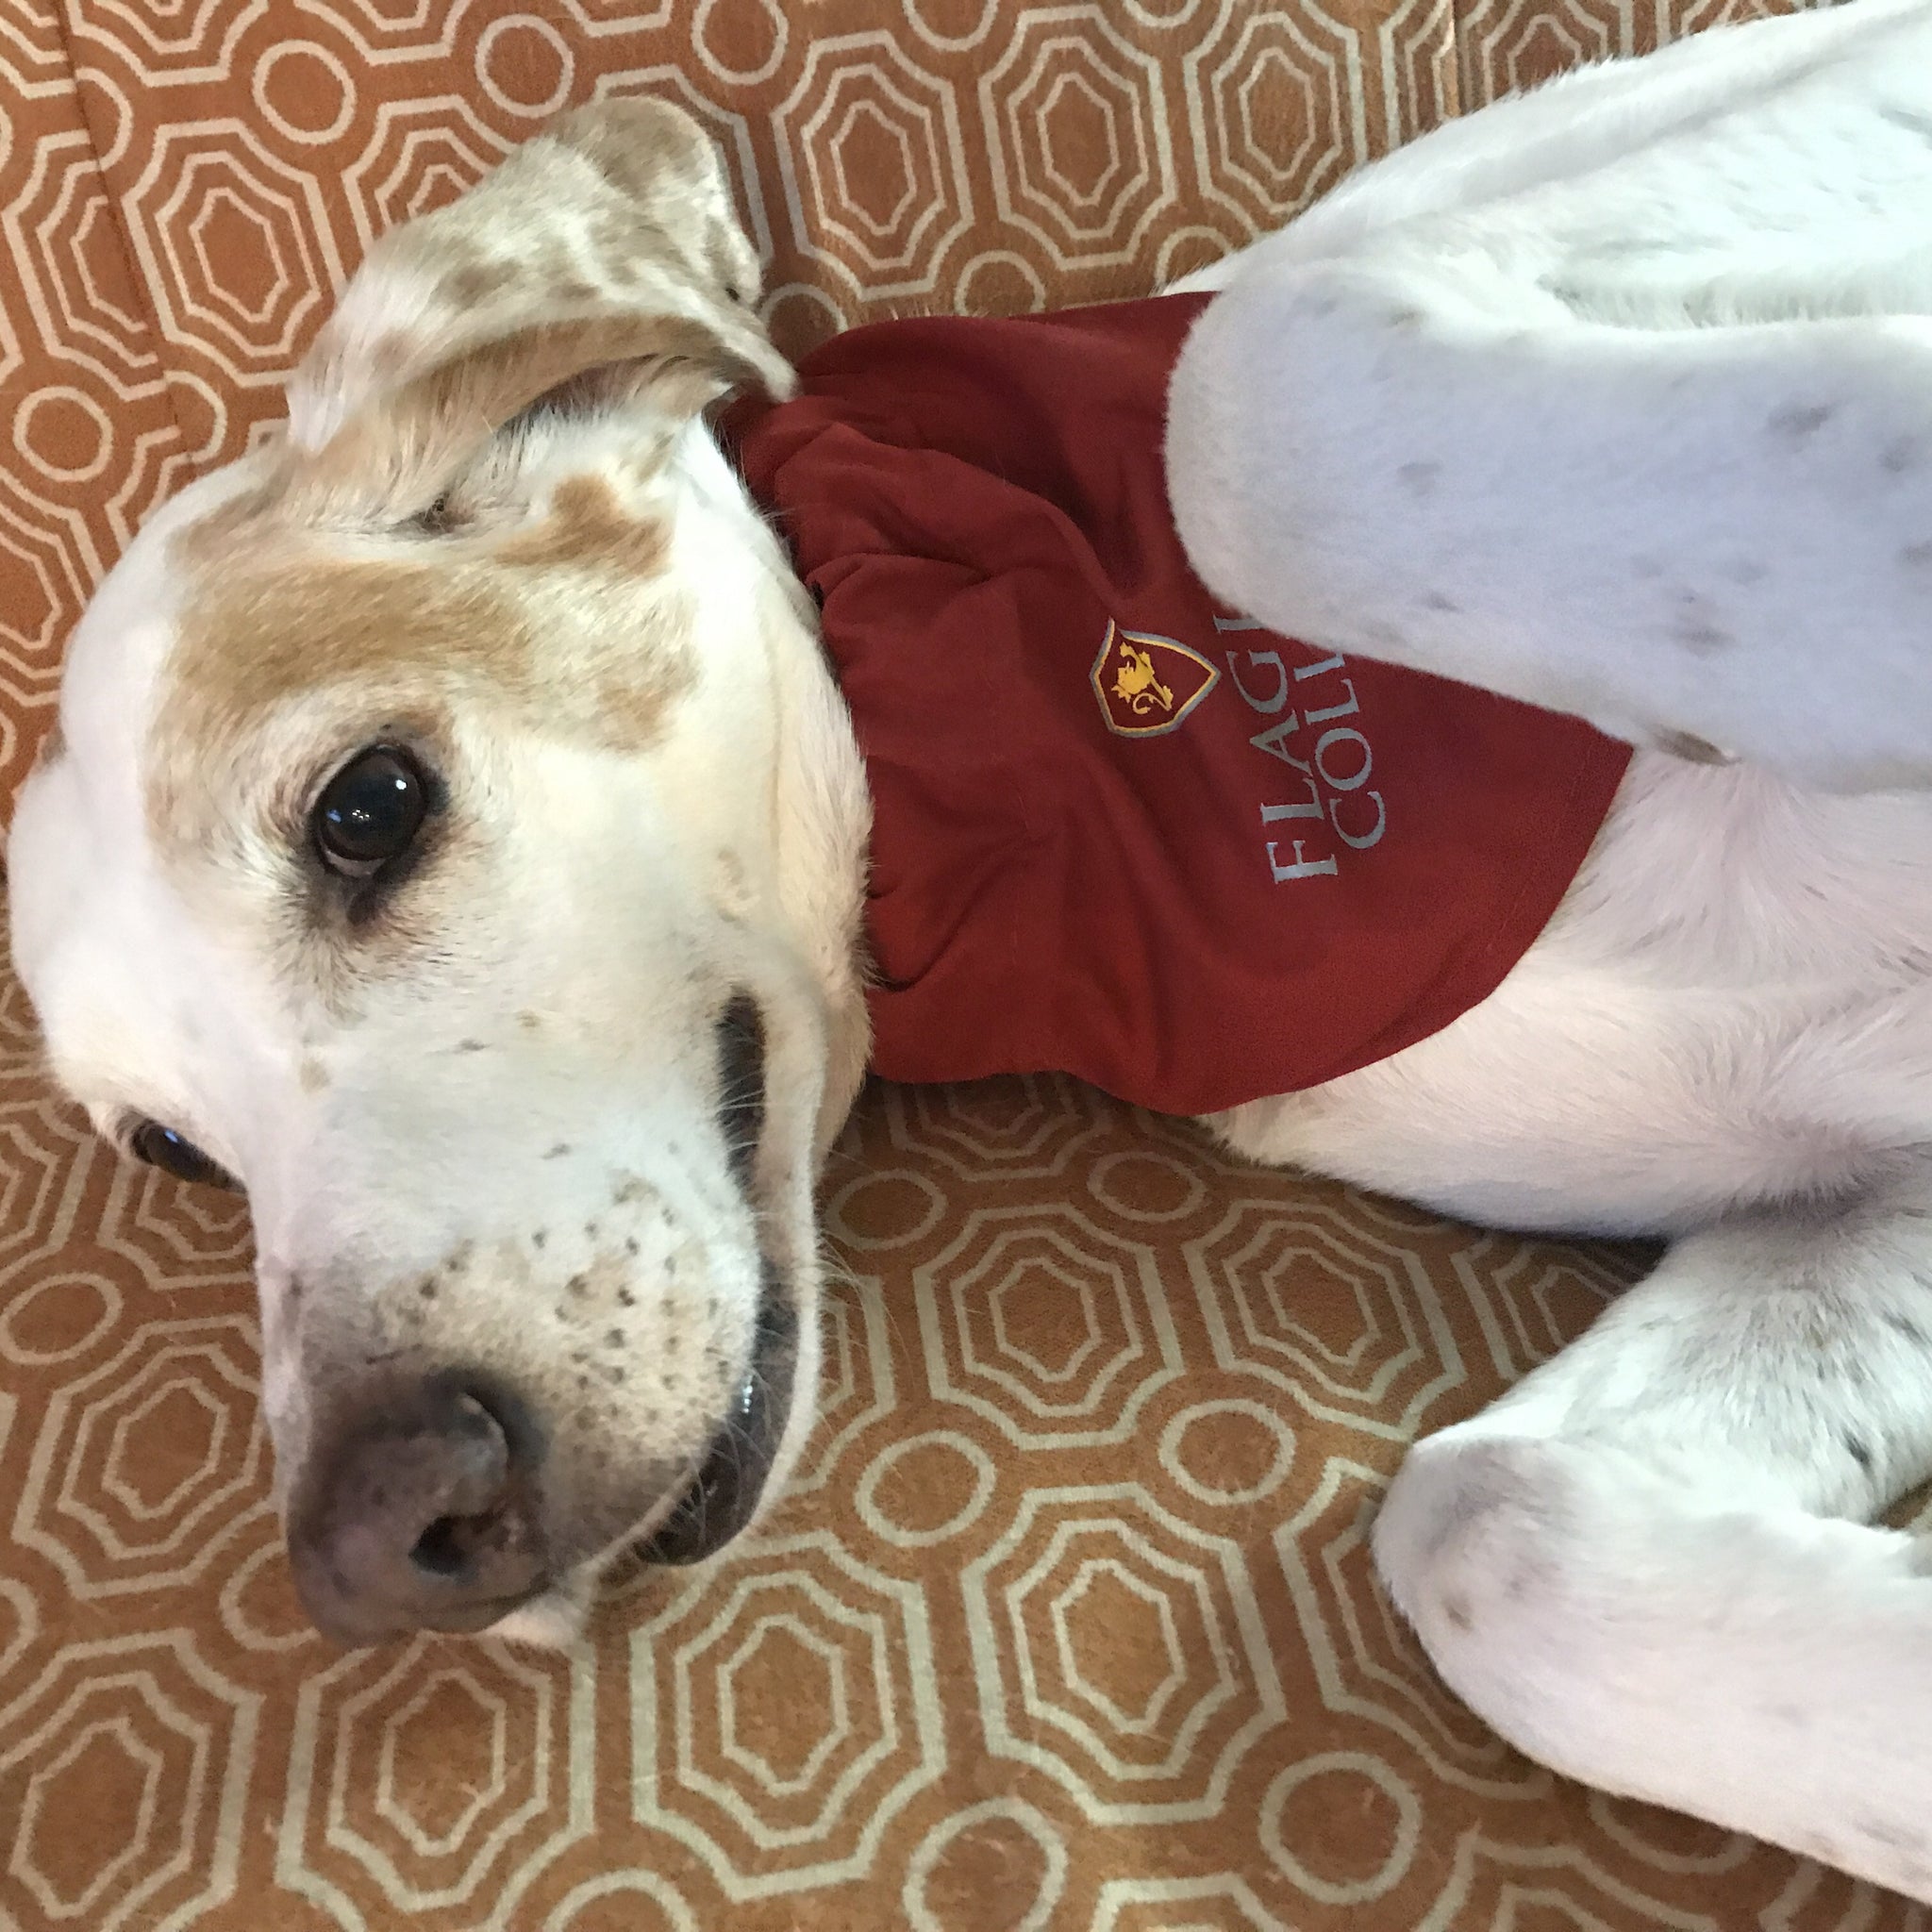 red dog bandanna with Flagler college printed in white and shield printed in red and gold